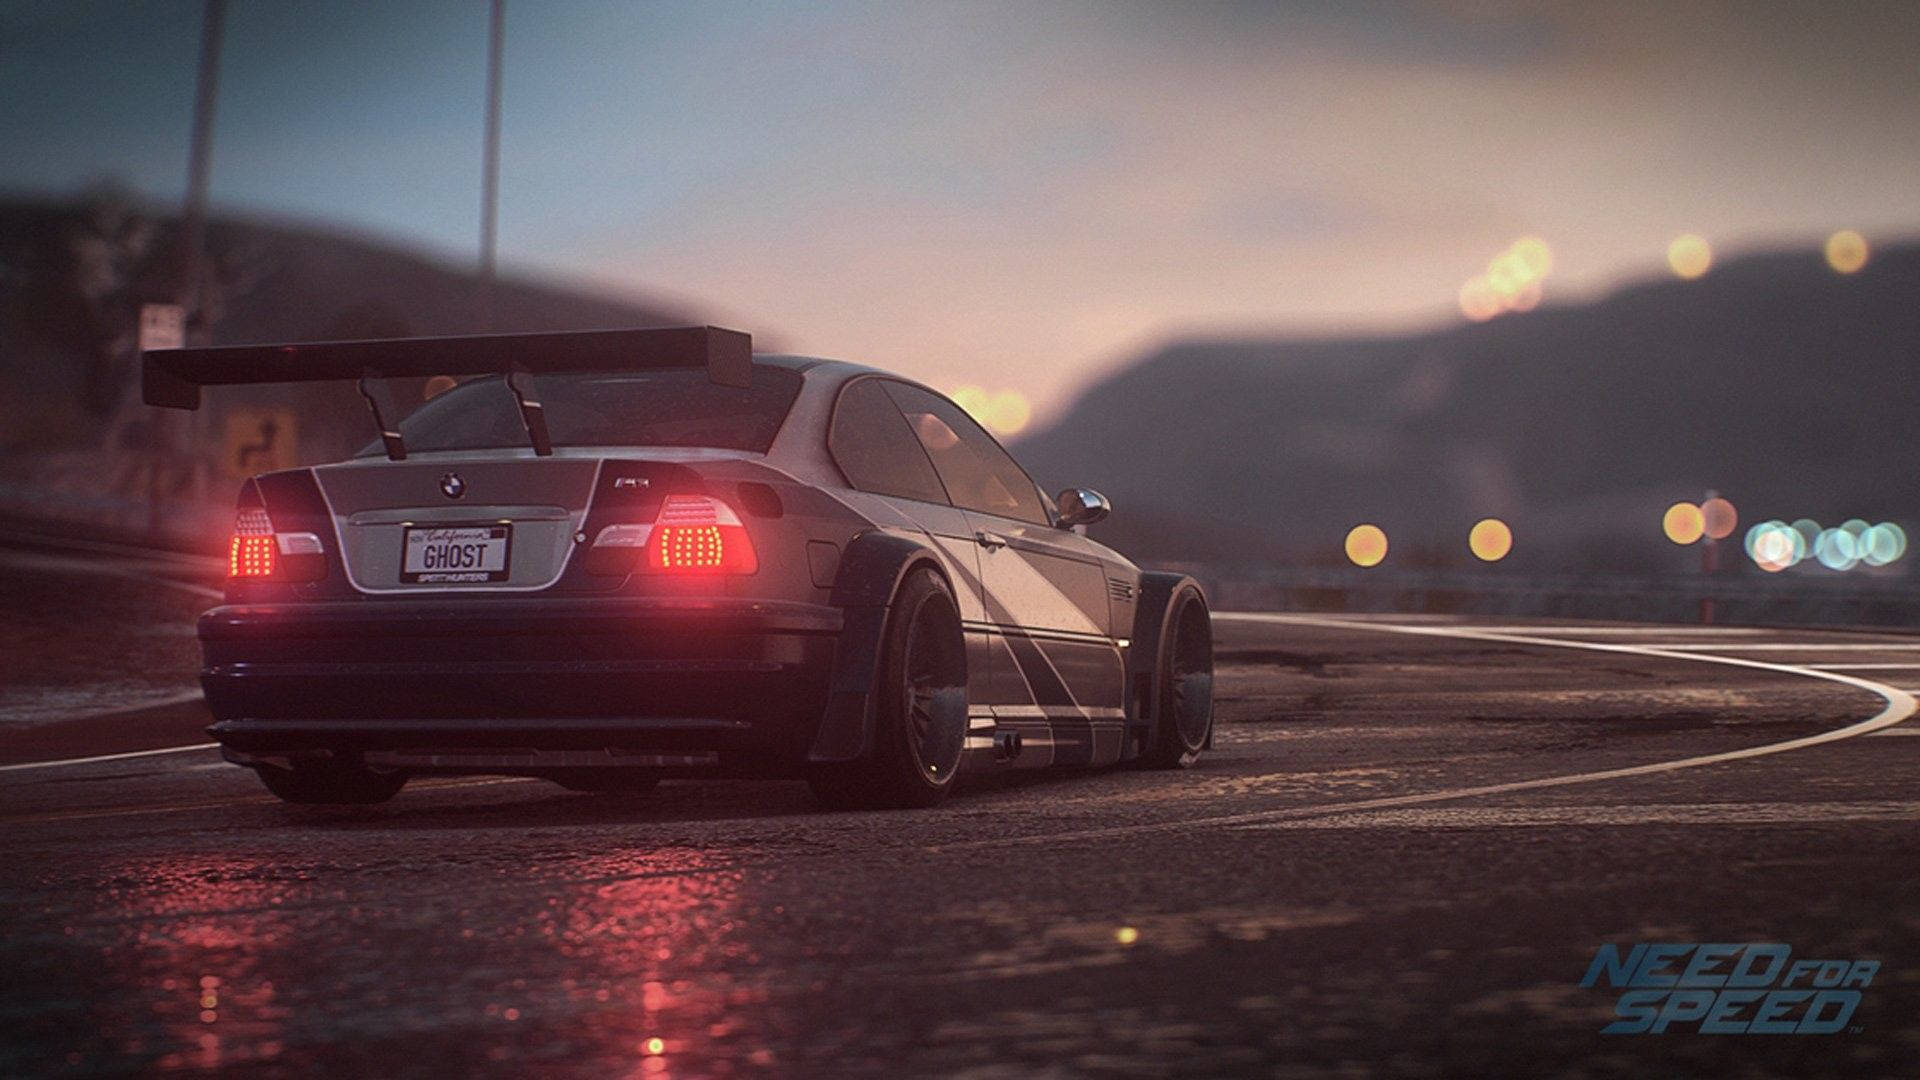 Rasantespannung Bei Need For Speed Wallpaper